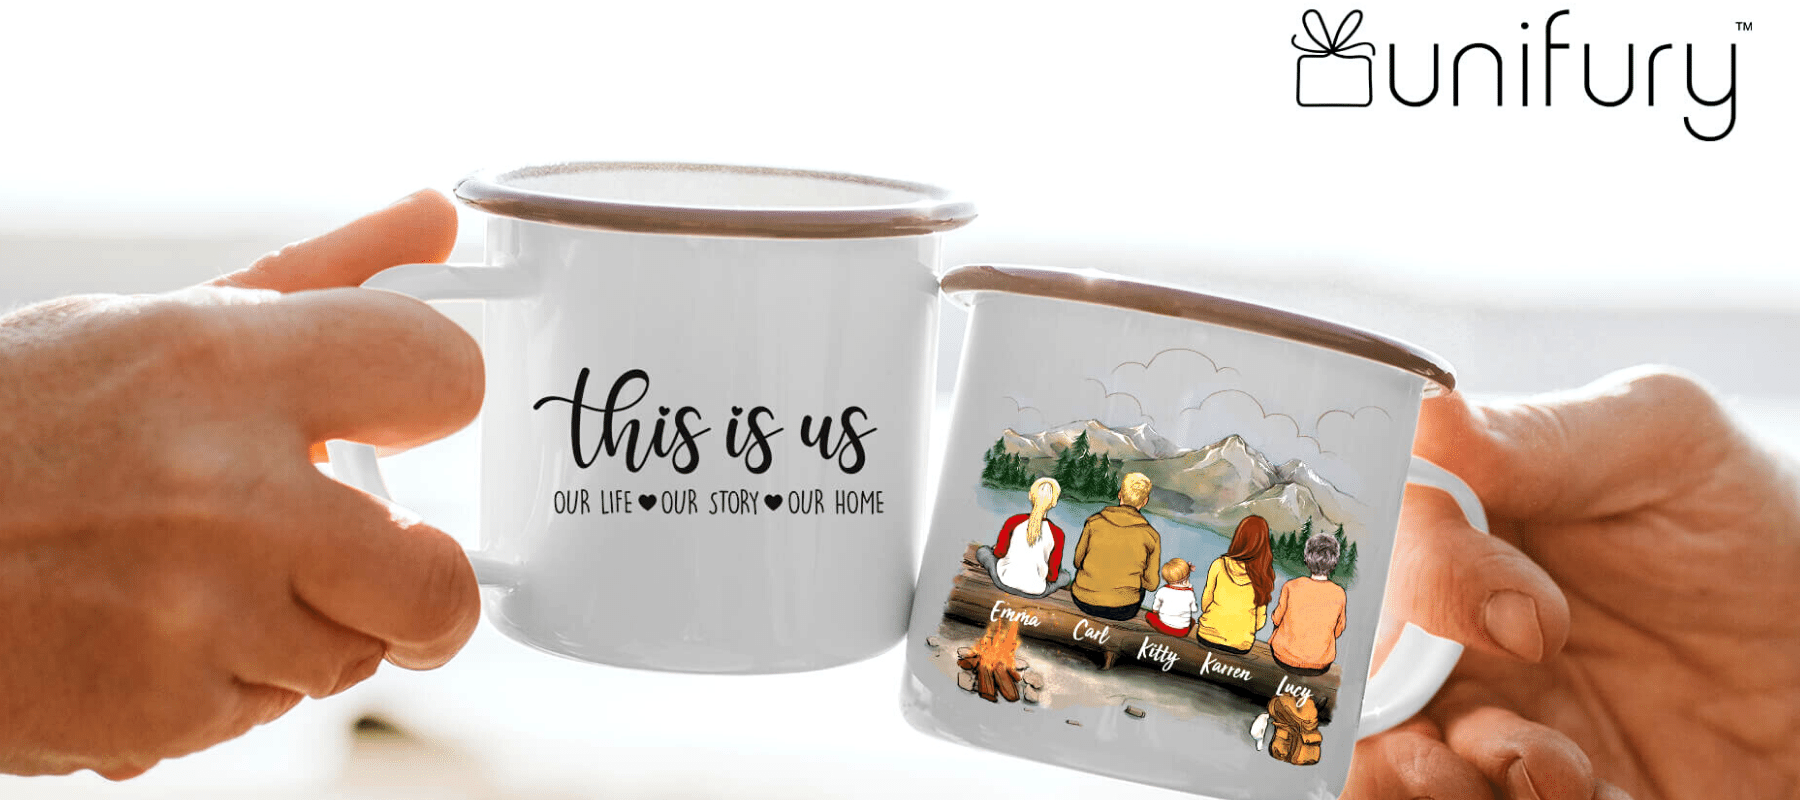 Top 20 Custom Mom Mugs - Mother's Day Coffee Mugs That Truly Delight Her Day